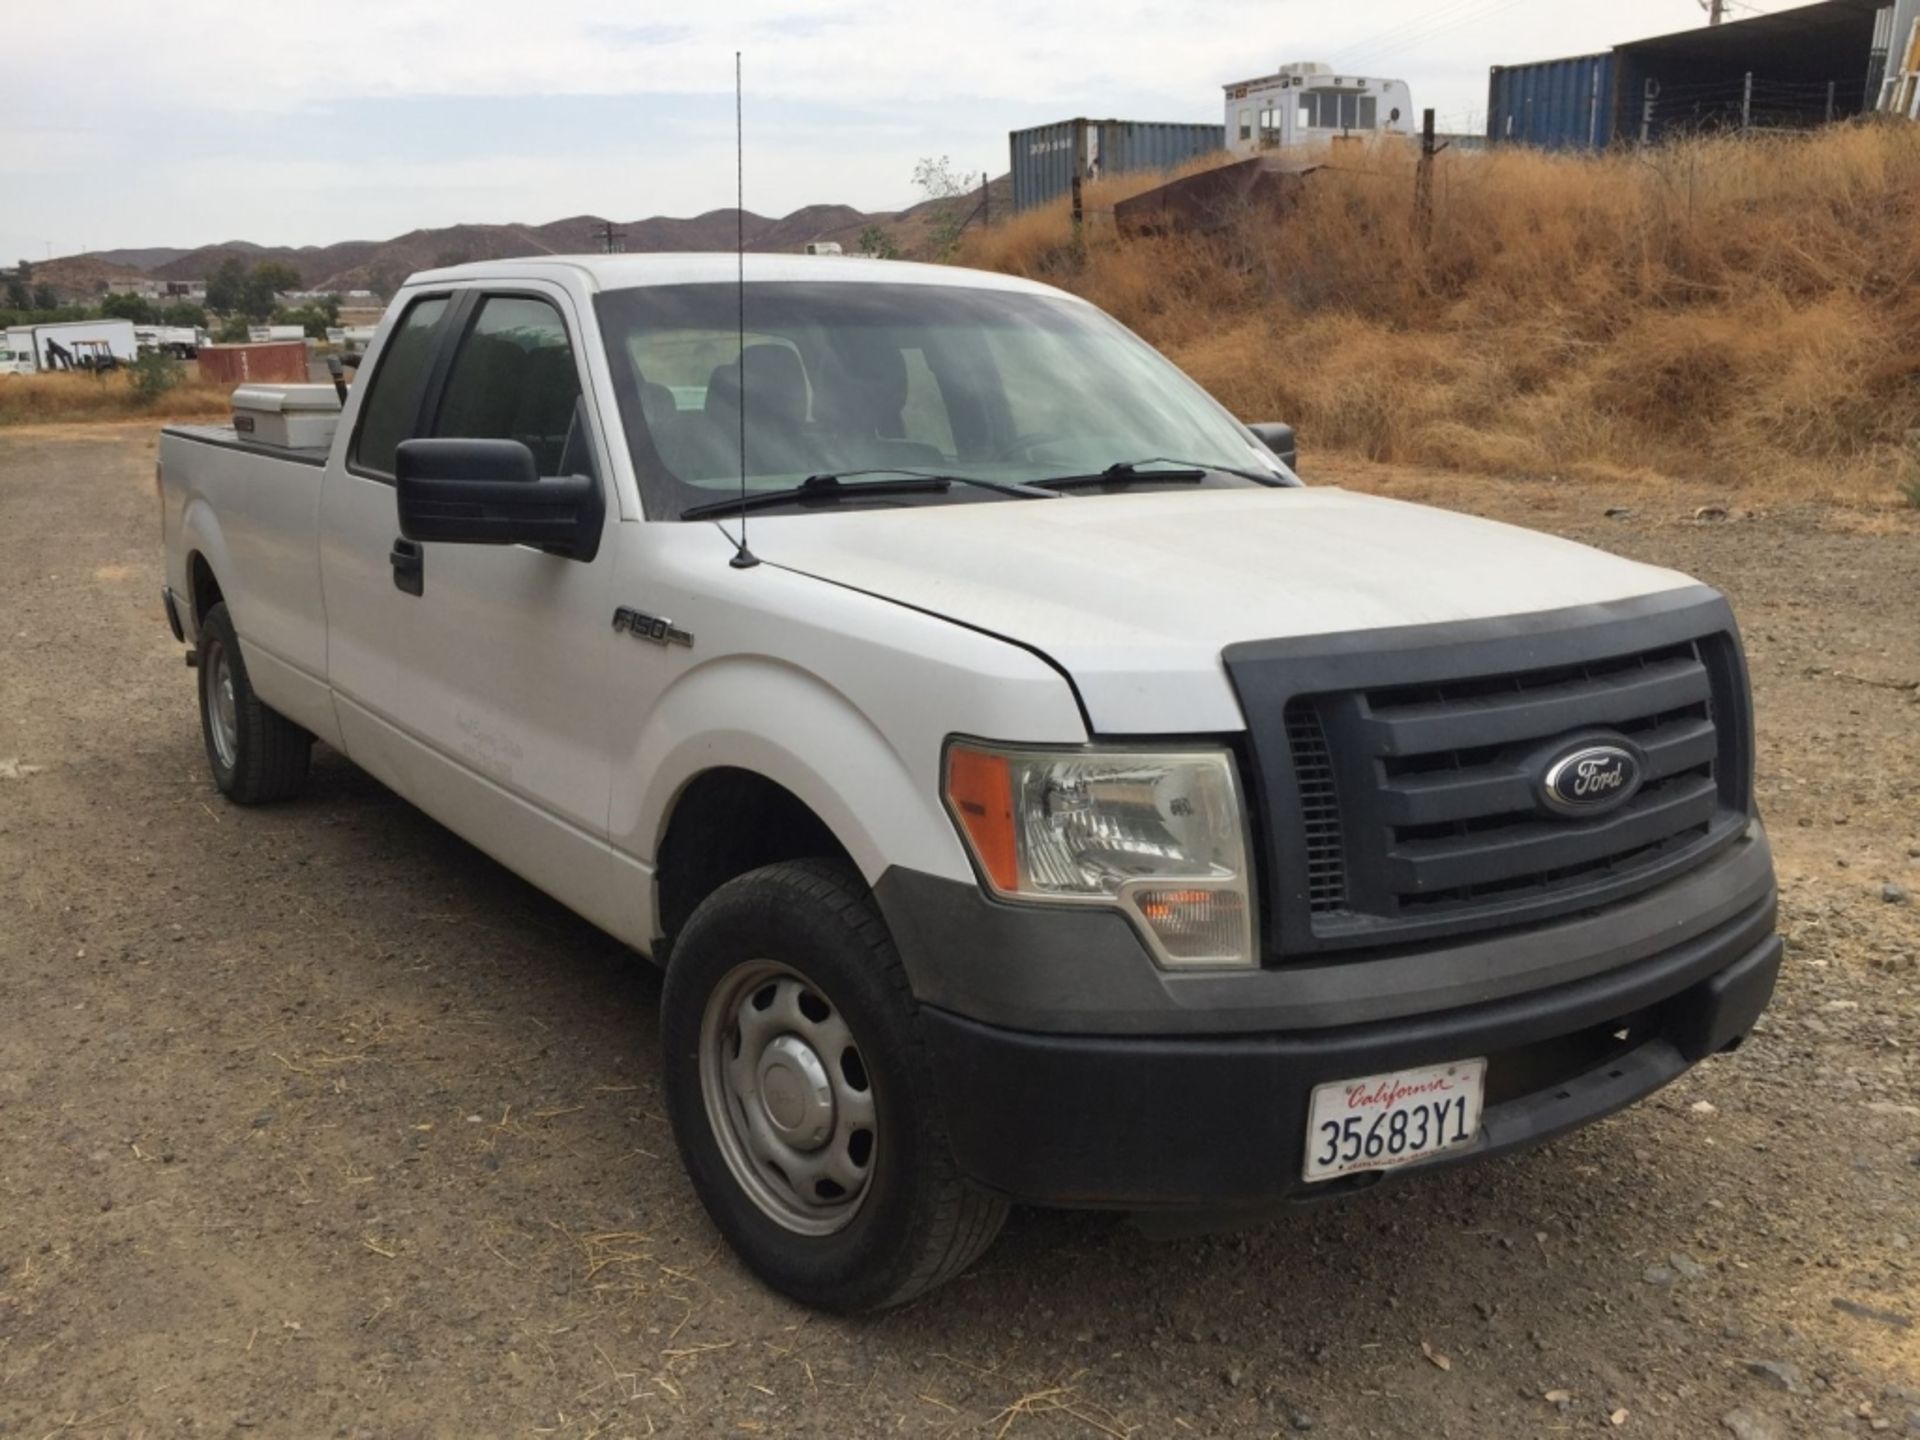 Ford F150 Extended Cab Pickup, - Image 2 of 69